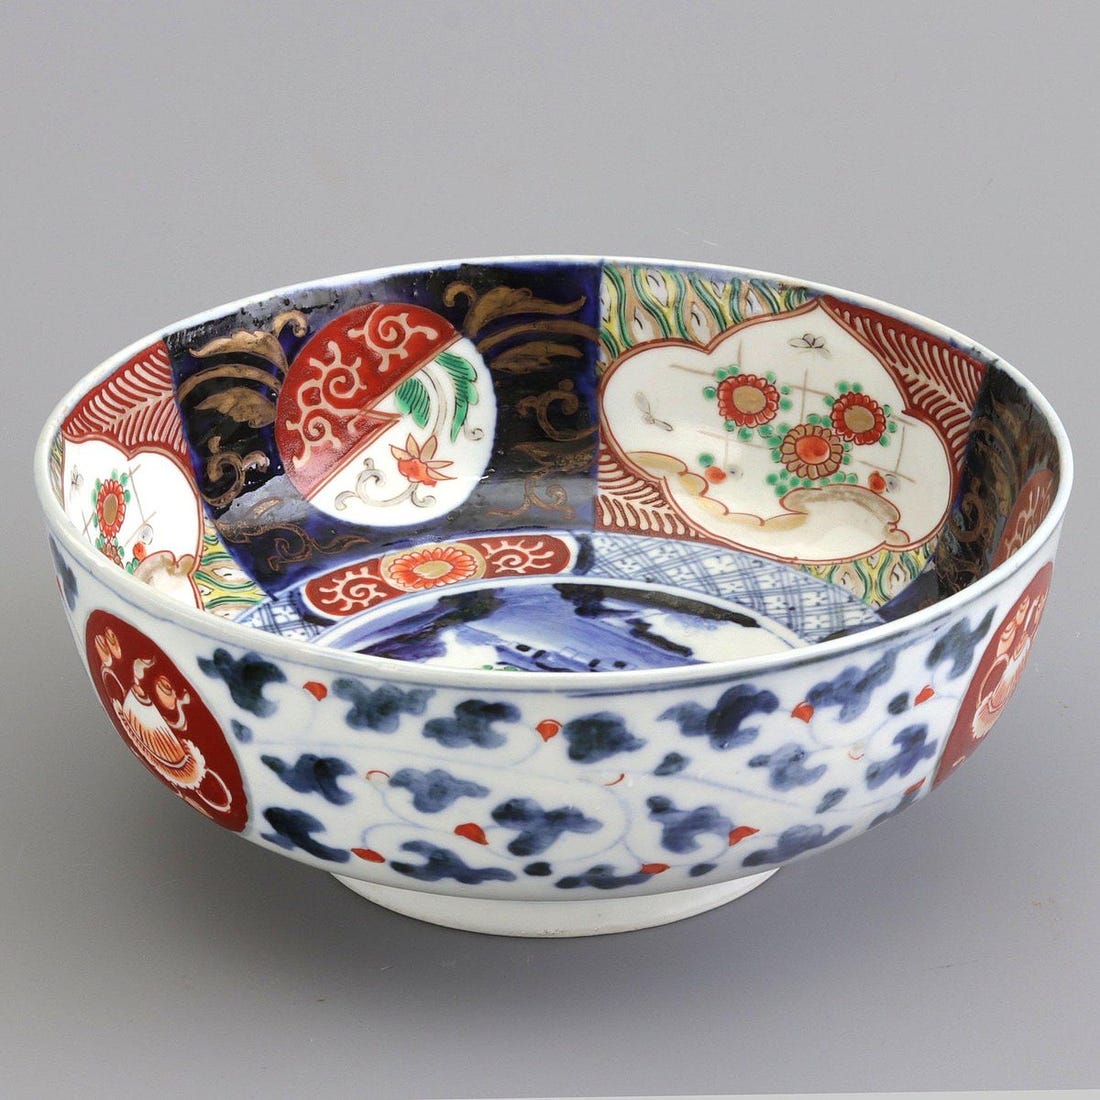 Vividly decorated Japanese serving bowl